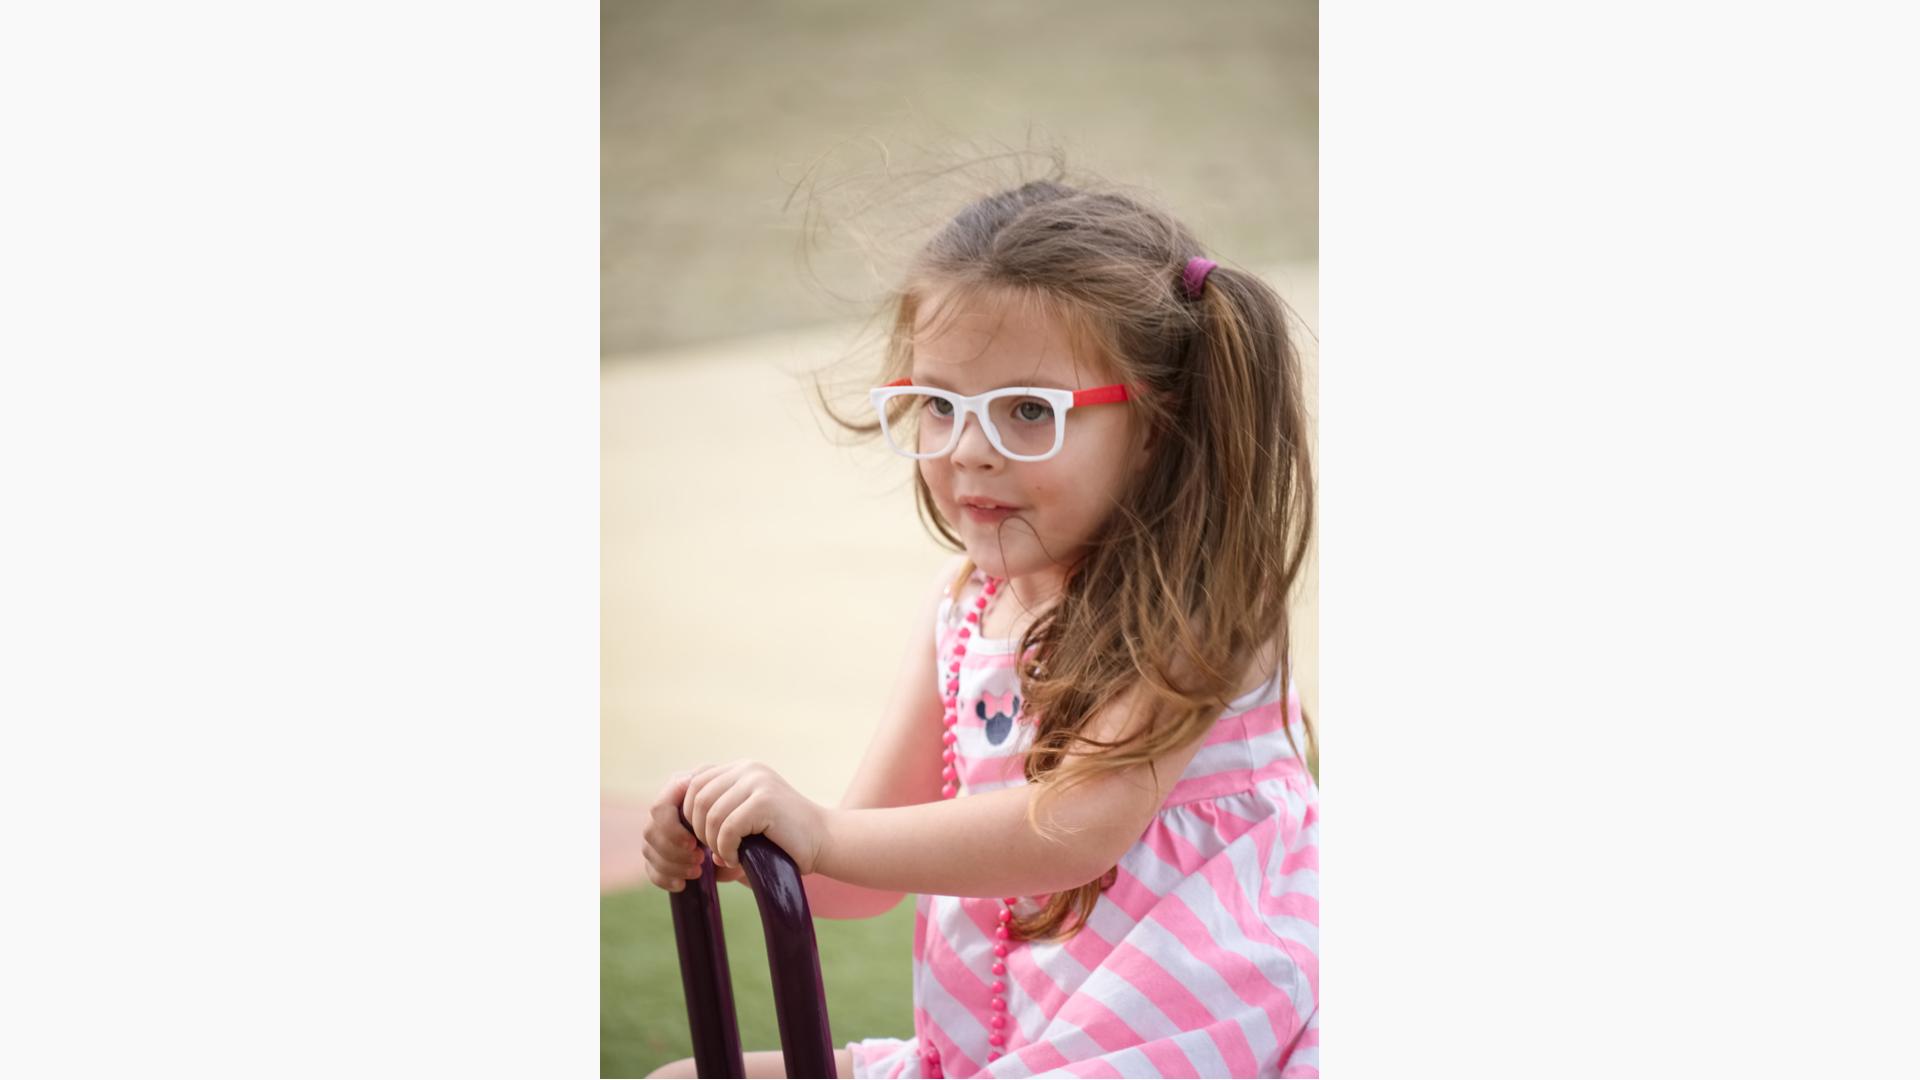 Girl wearing glasses and pink stripe dress sitting on see-saw